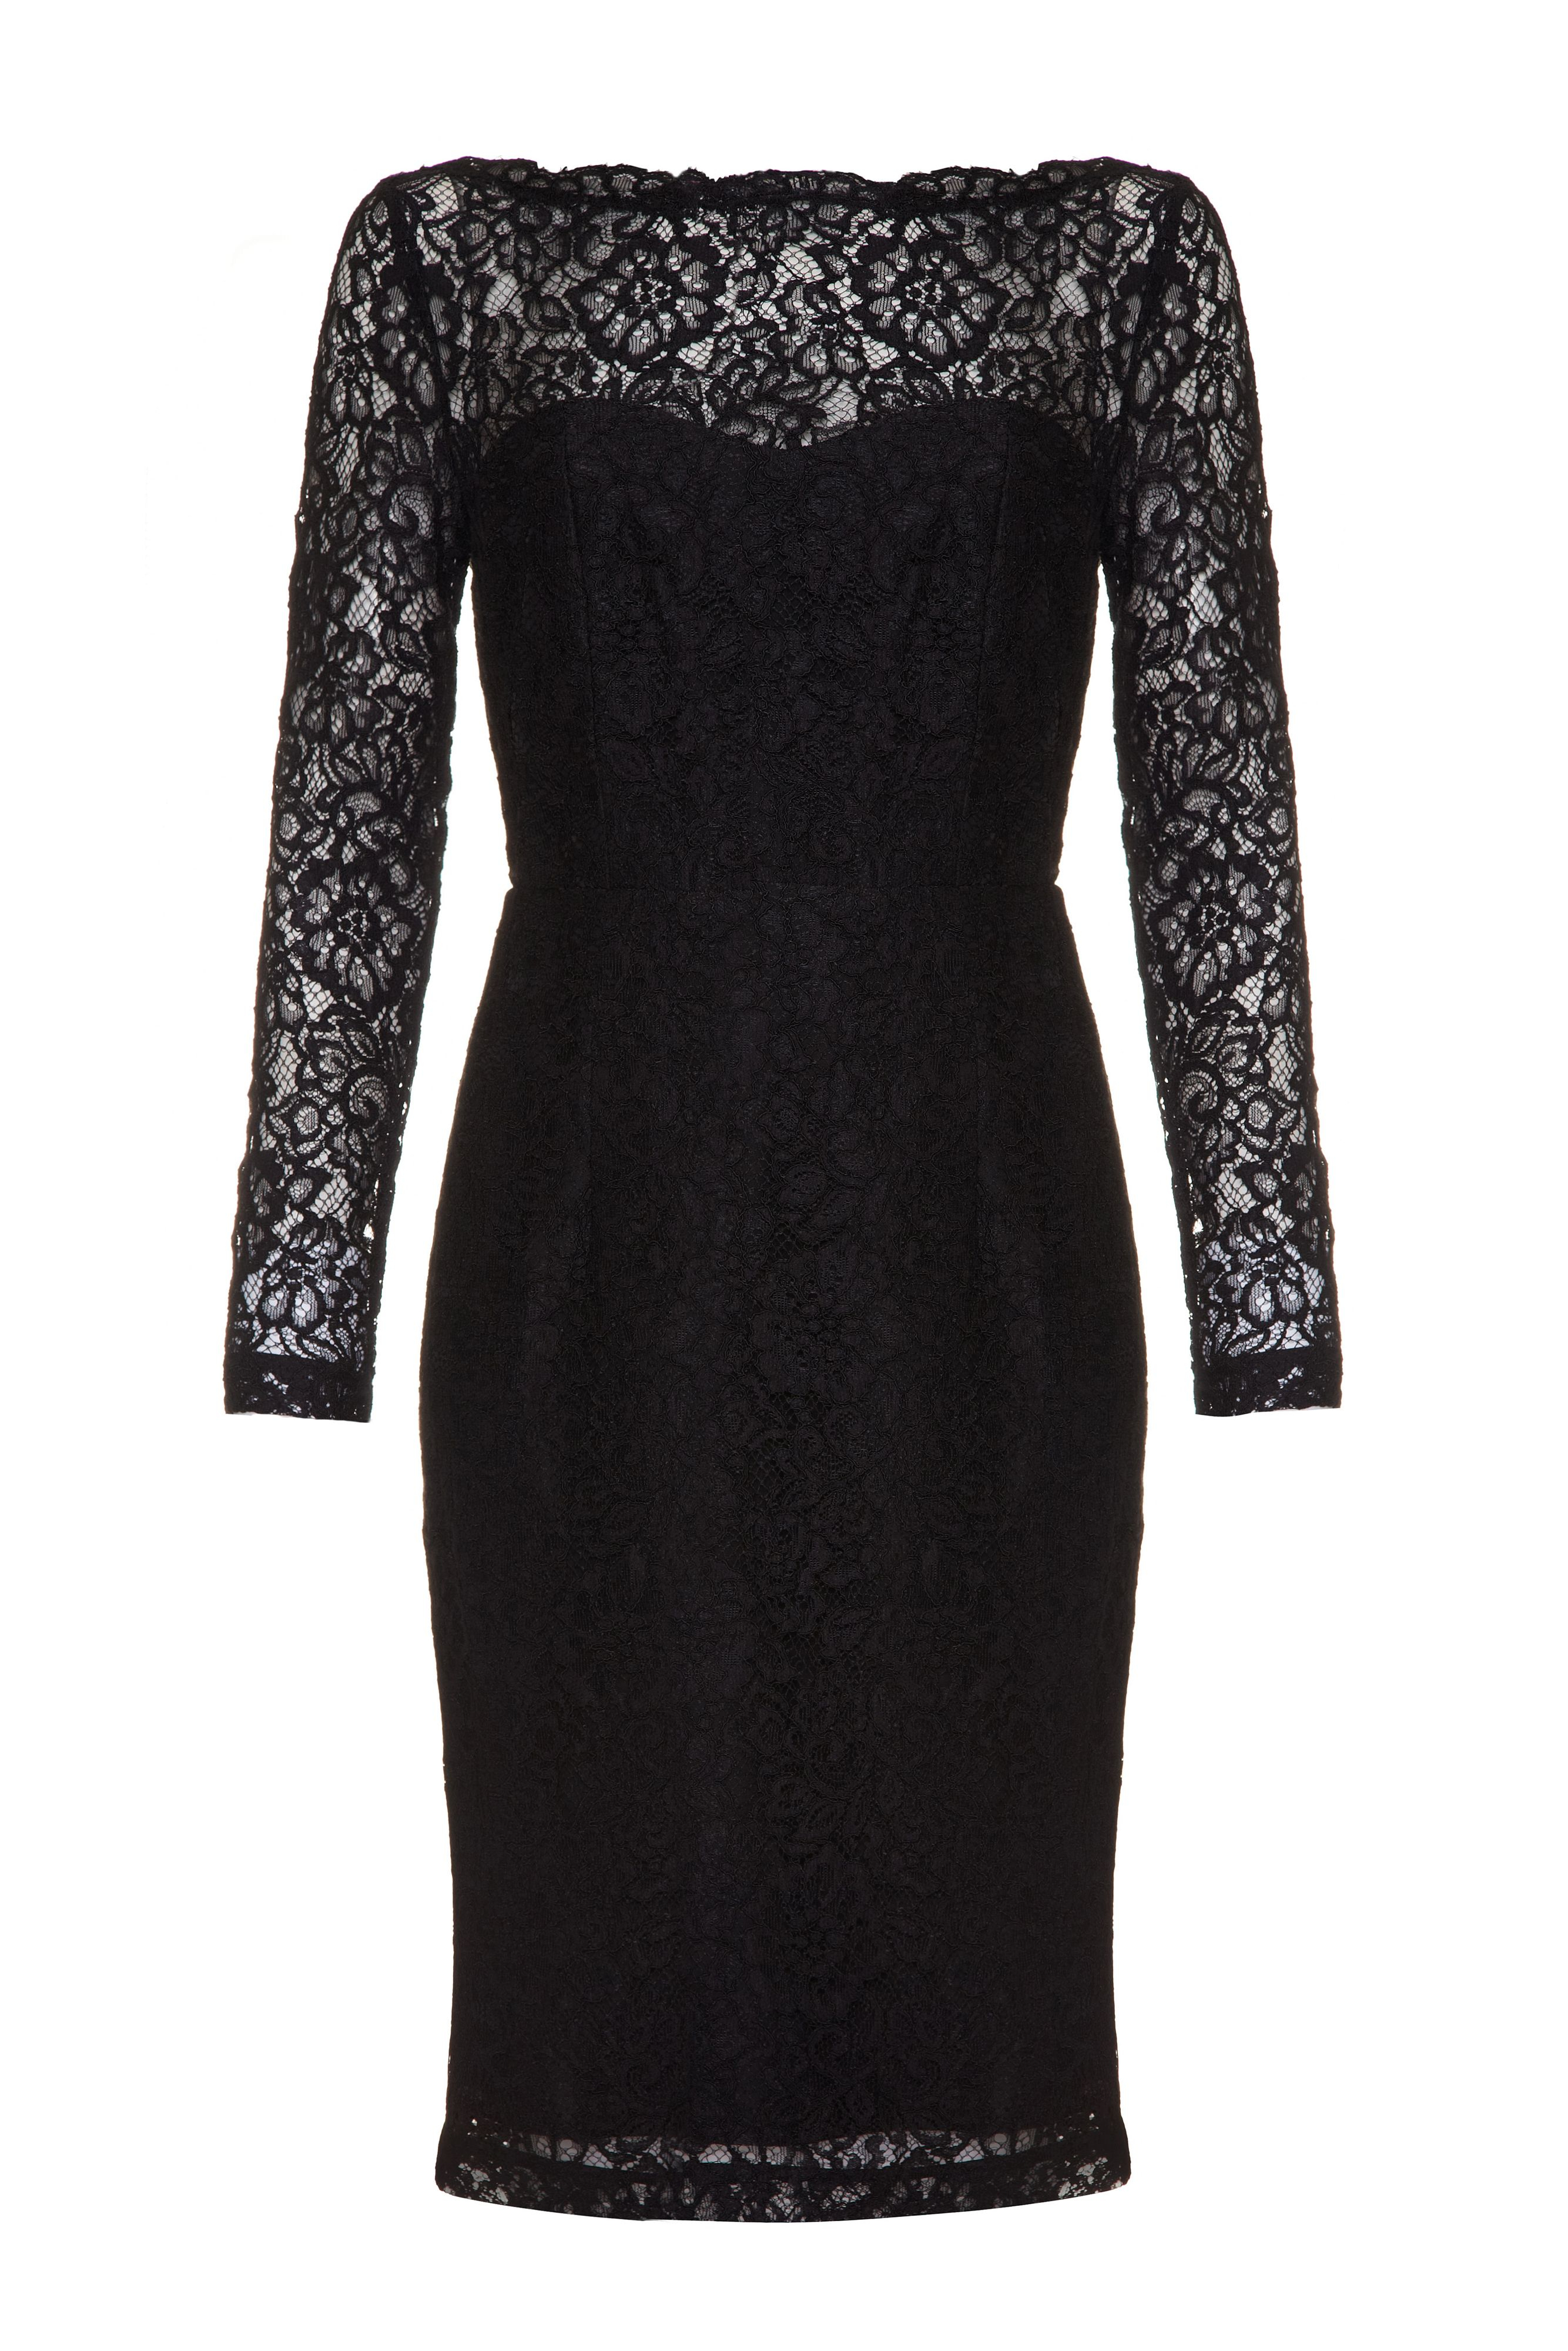 Almost Famous | Black Scalloped Lace Dress | Lyst